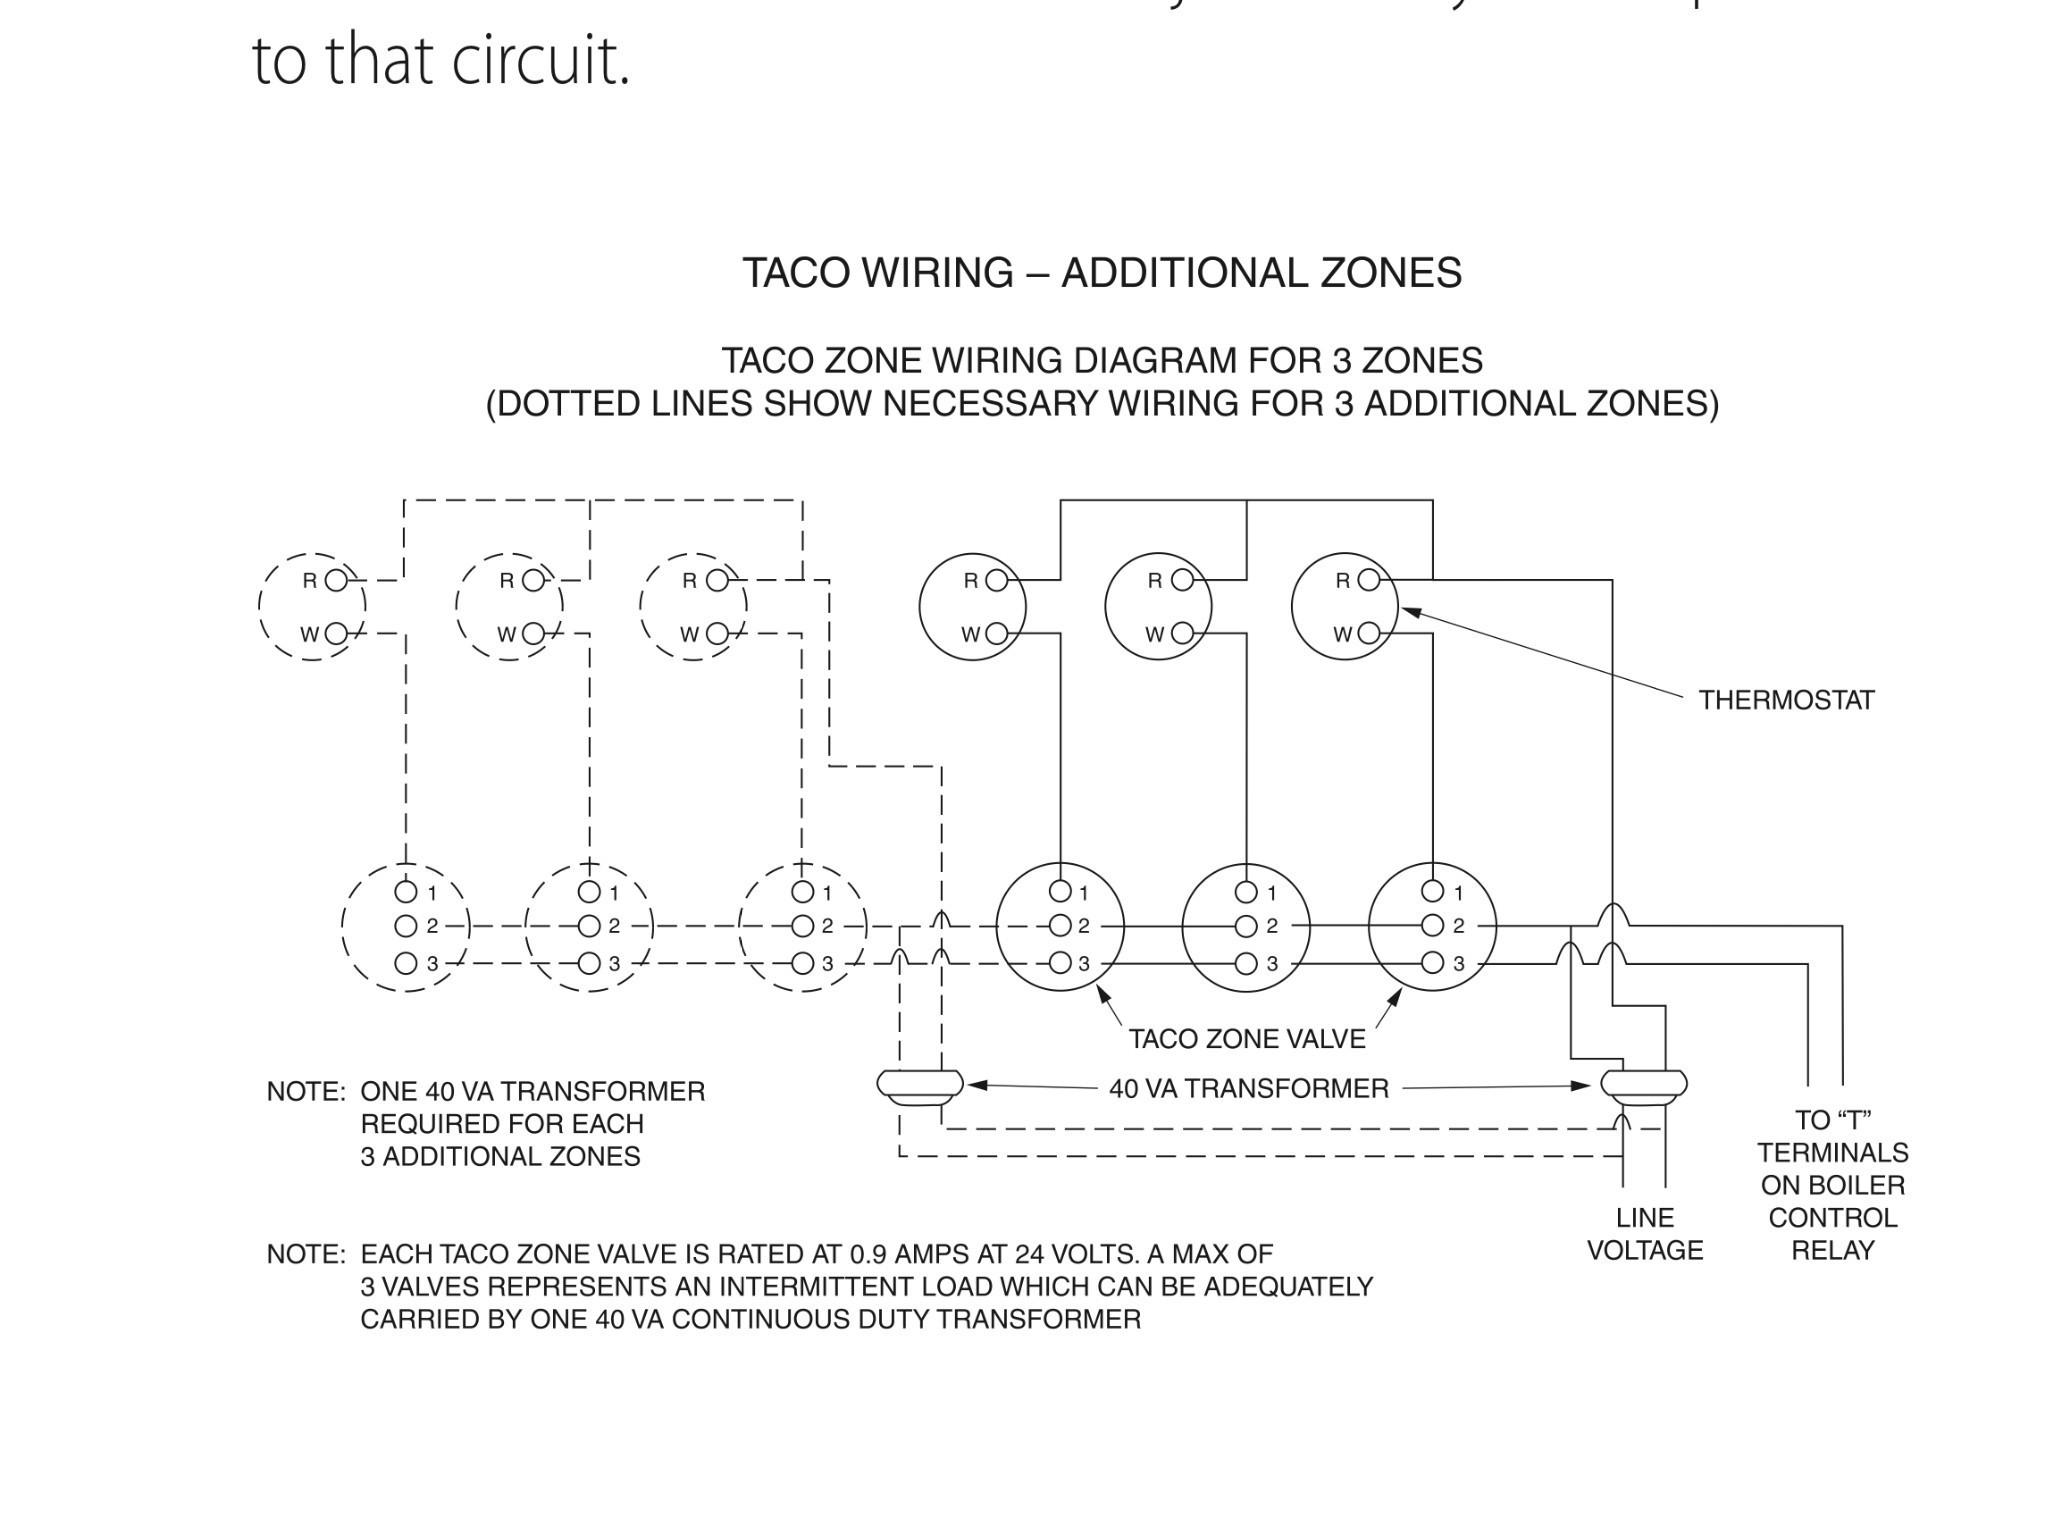 Wiring Diagram for Zone Valves Save Beuler Relay Wiring Diagram Save Zone Valve Wiring Installation